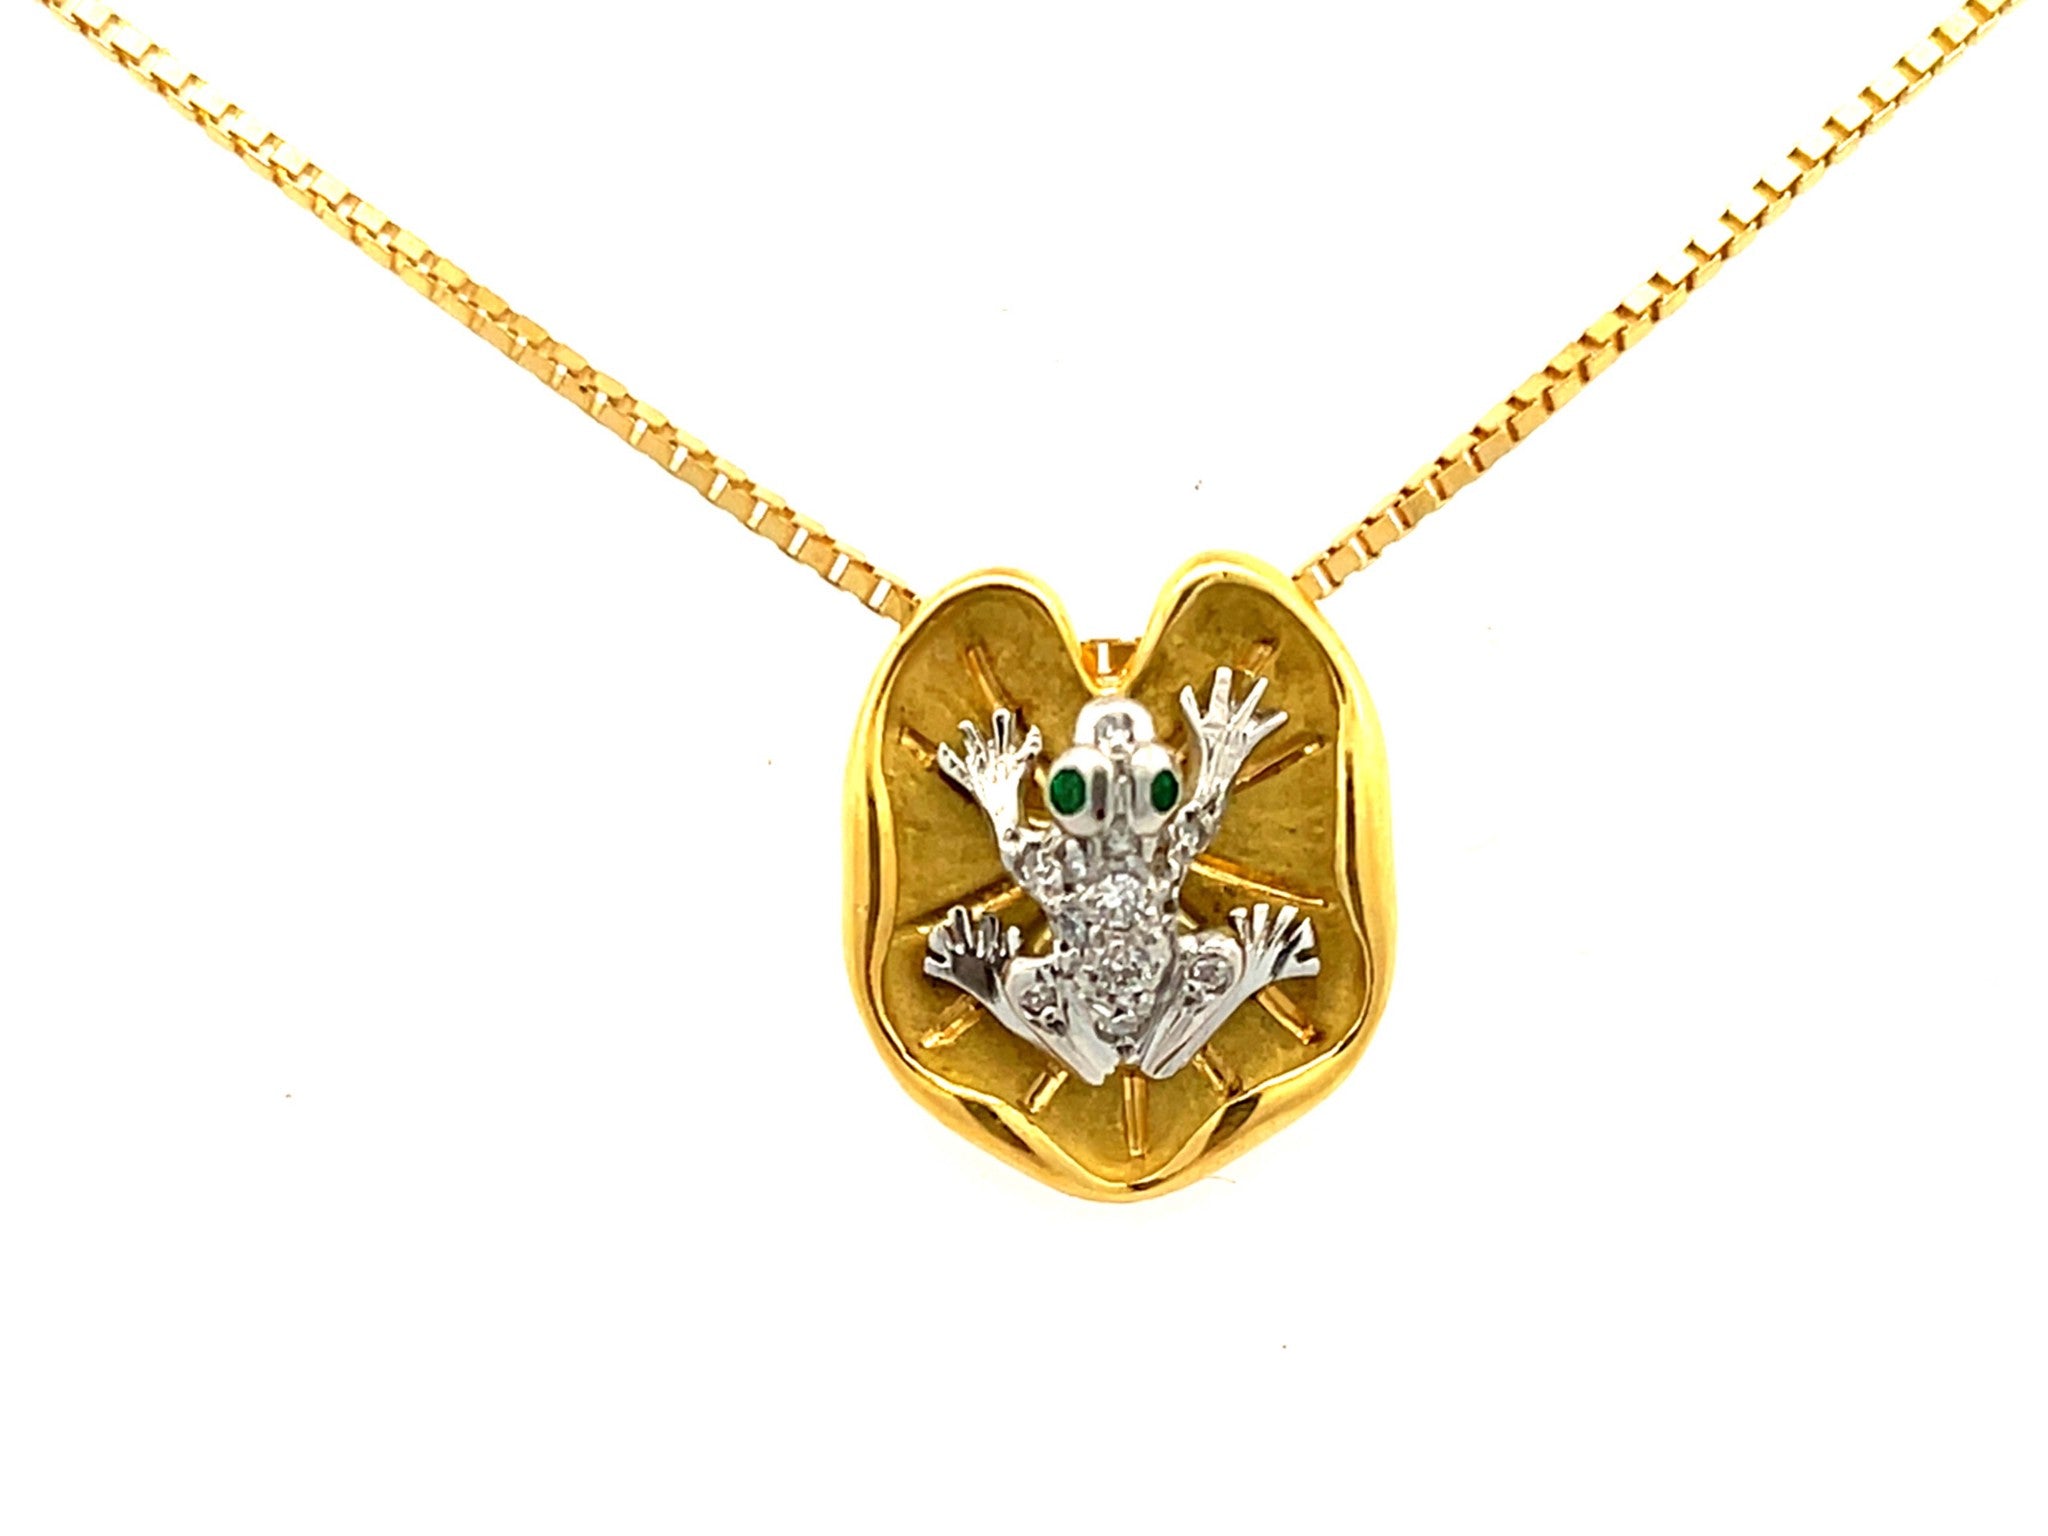 Emerald Eyes & Diamond Frog Necklace on Lily Pad in 18K Yellow Gold and Platinum